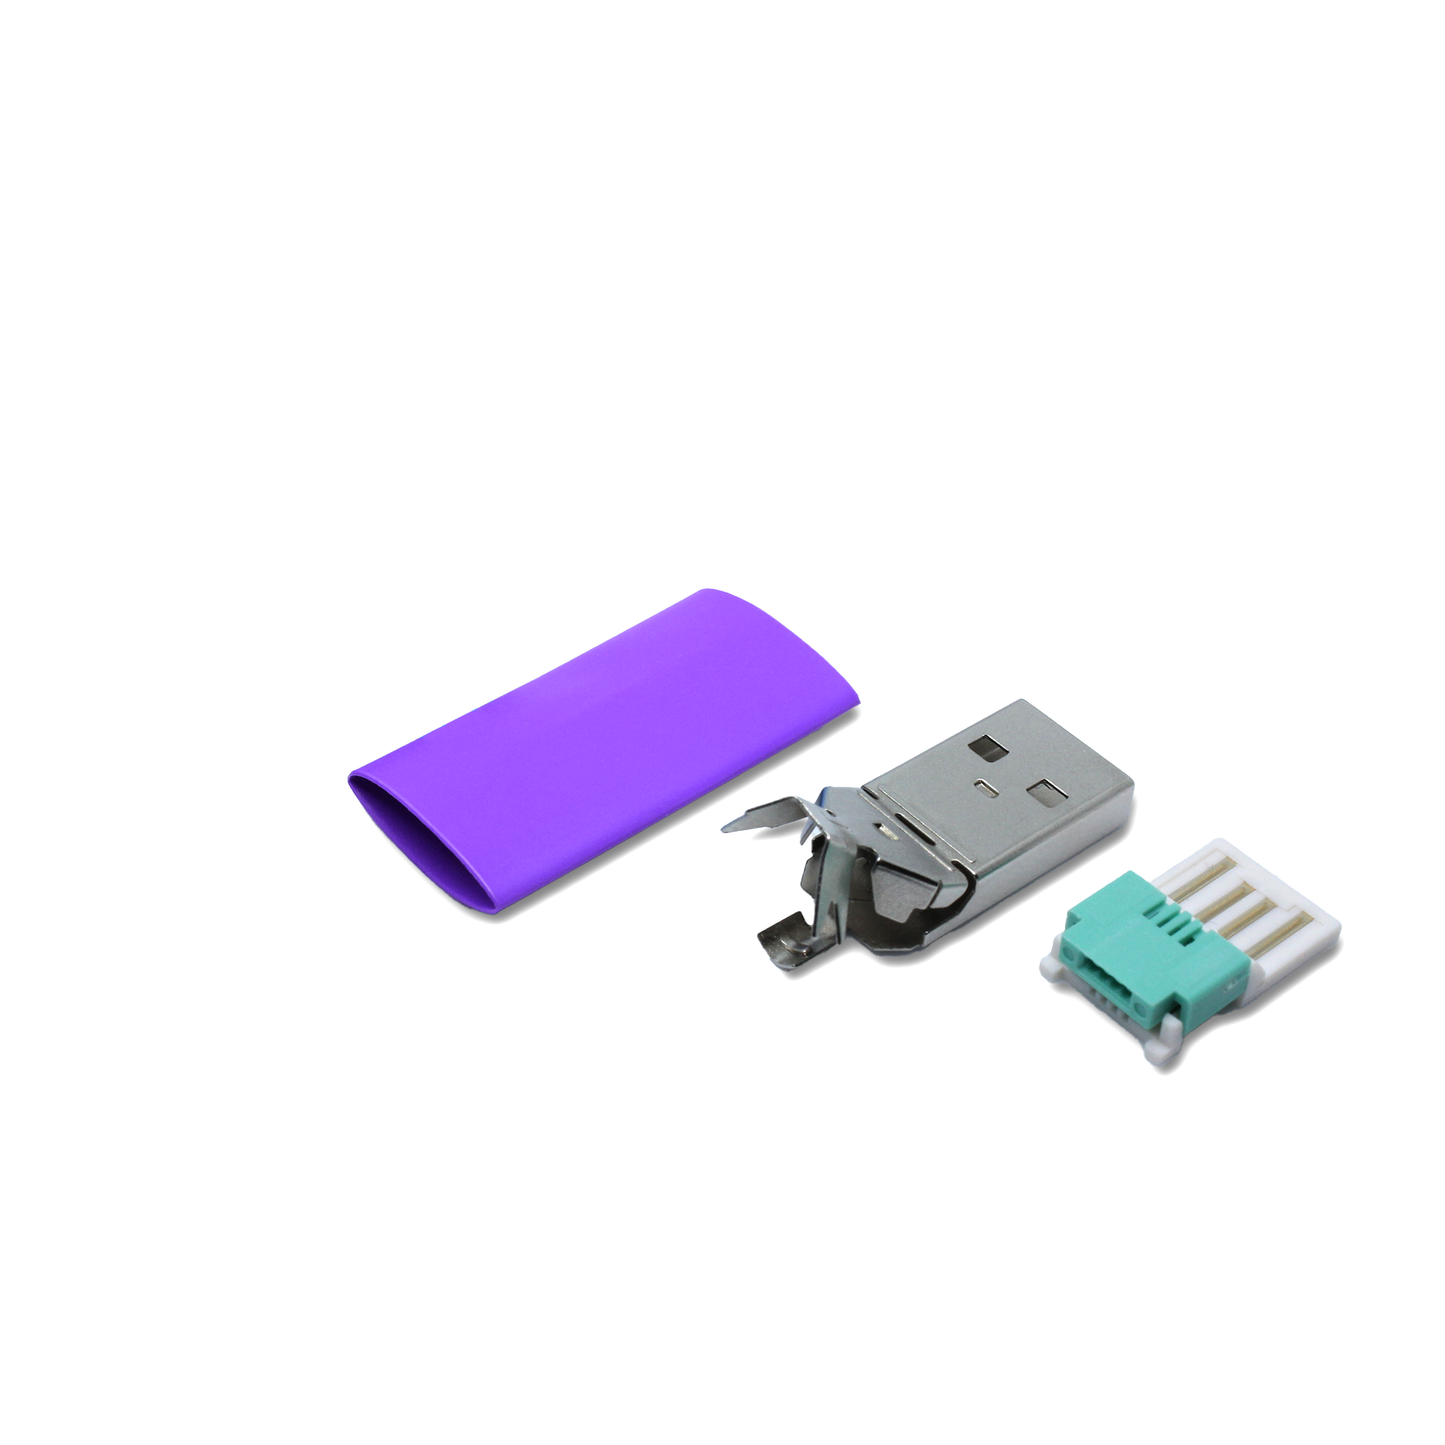 Single parts USB A plug in purple, the spare part can be used to repair a USB 2.0 cable without soldering (crimping)